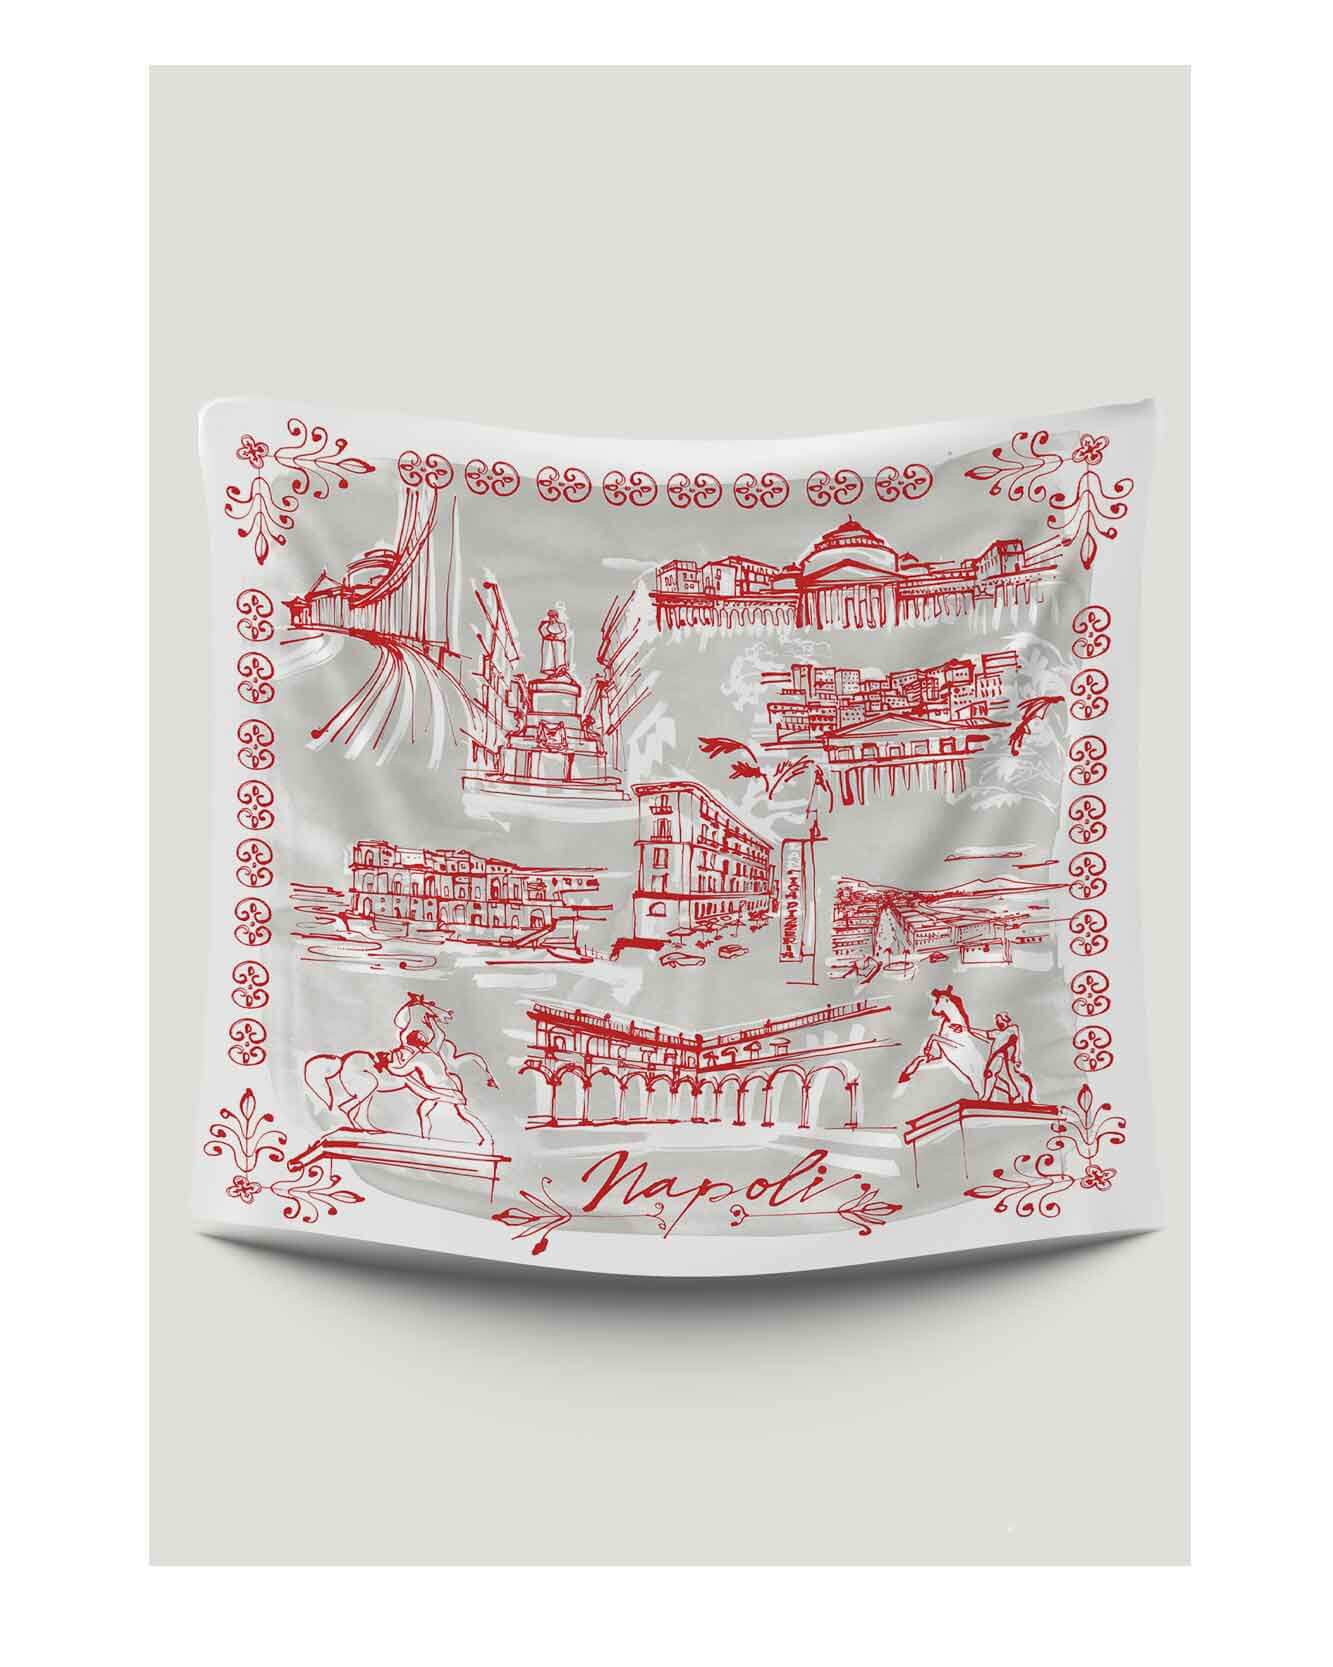 Silk scarf illustration. Inspired by Italian city of Naples for fashion brand Kitson, who's headquarters are in the ancient Italian city. Simple linear style illustration and flat colours taken from the fashion houses upcoming collections. With drawings of famous Naples landmarks and  architecture.